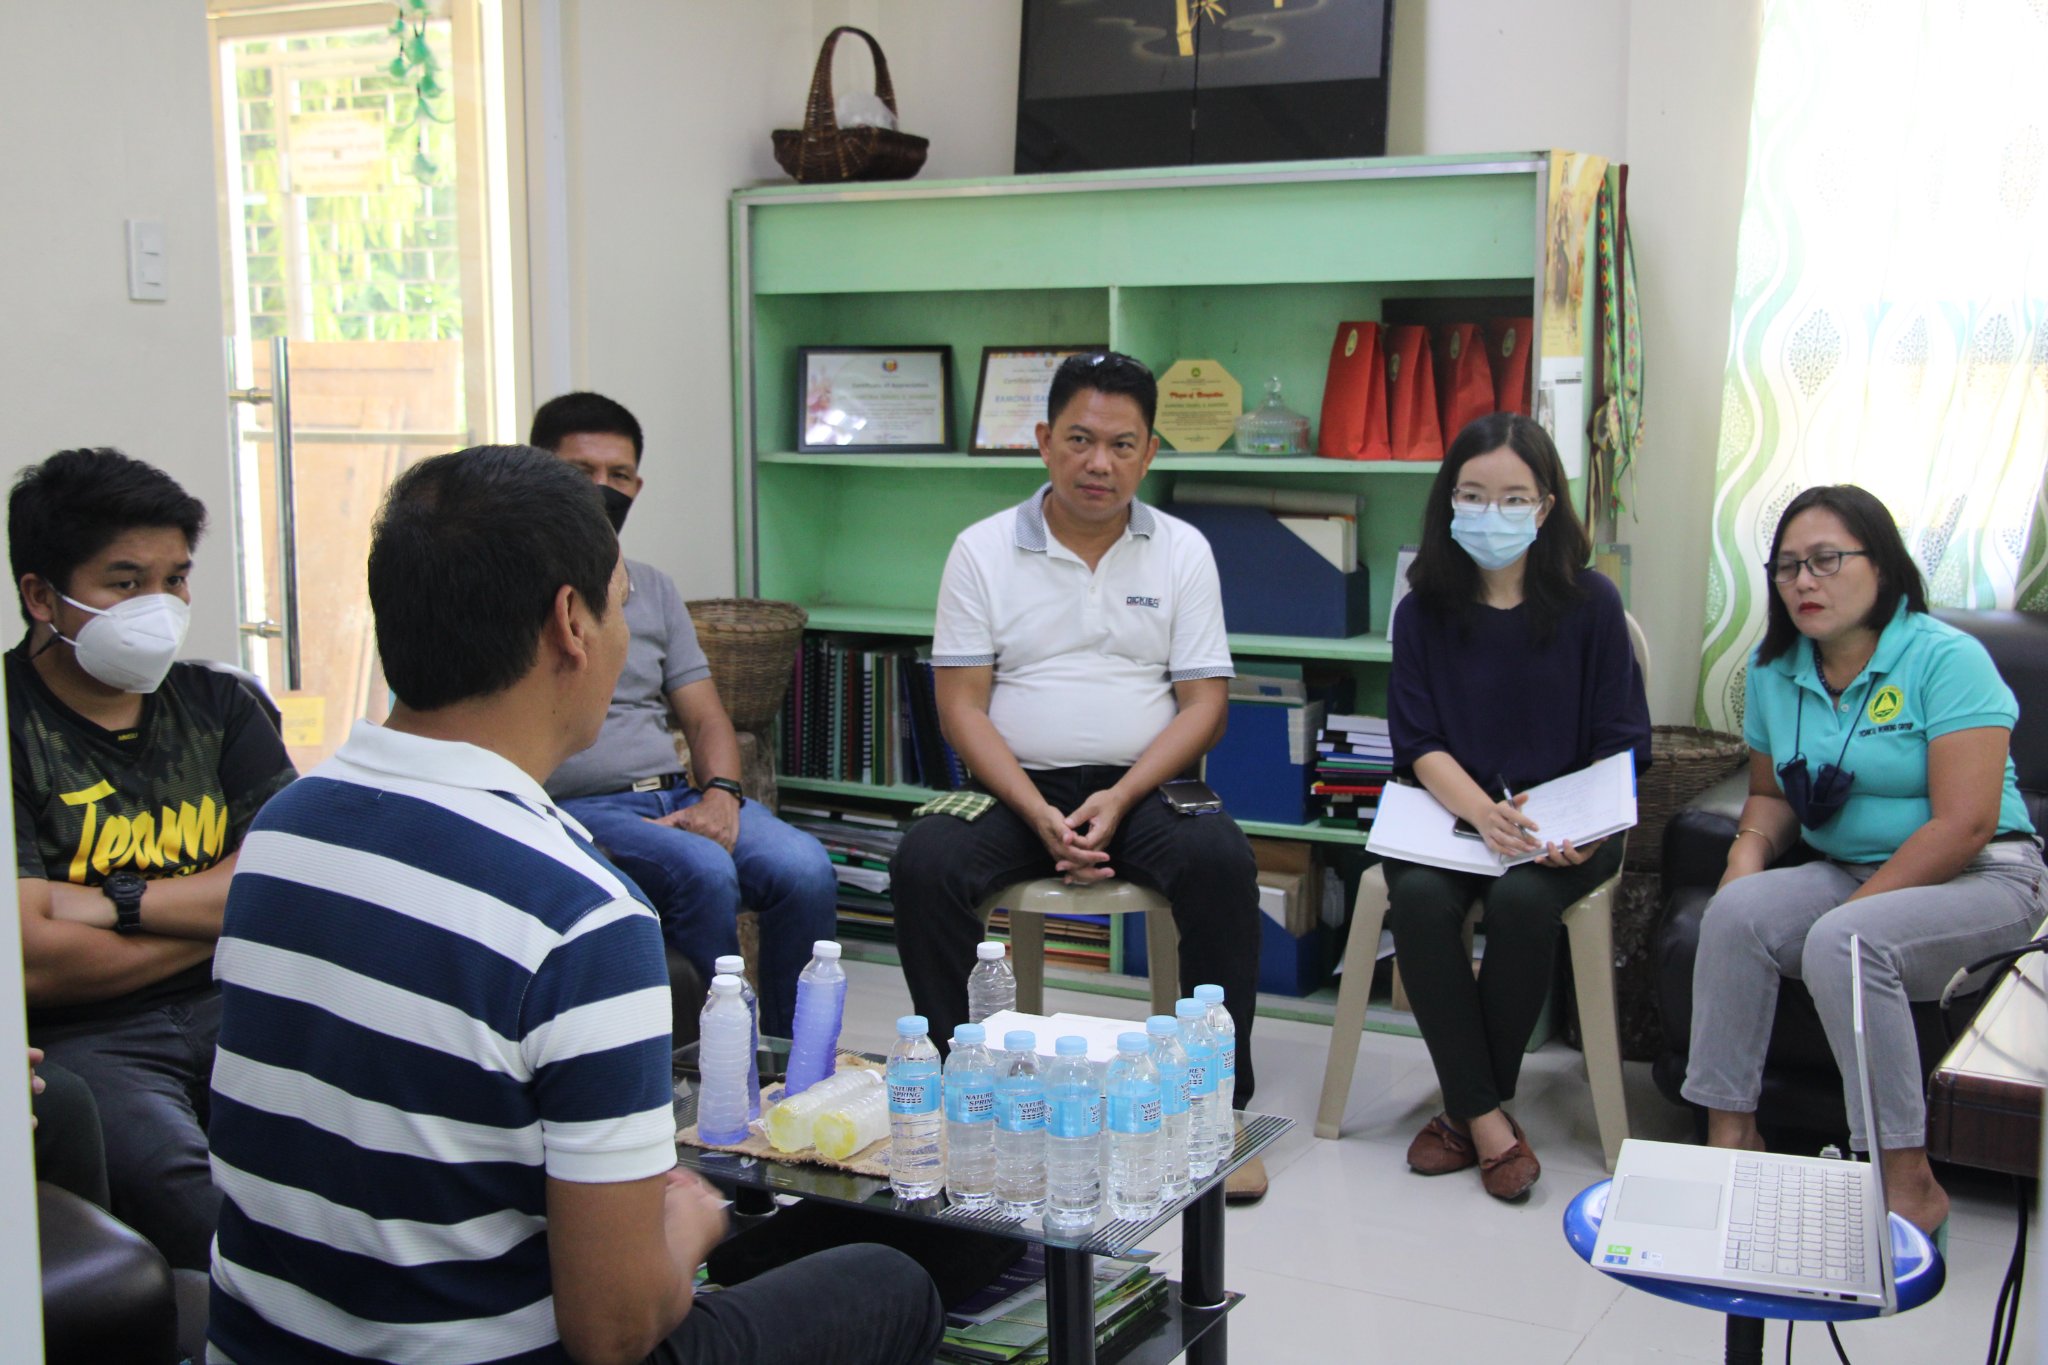 MARIANO MARCOS STATE UNIVERSITY (MMSU) PRESIDENT CONDUCTS SITE VISIT TO CBSUA